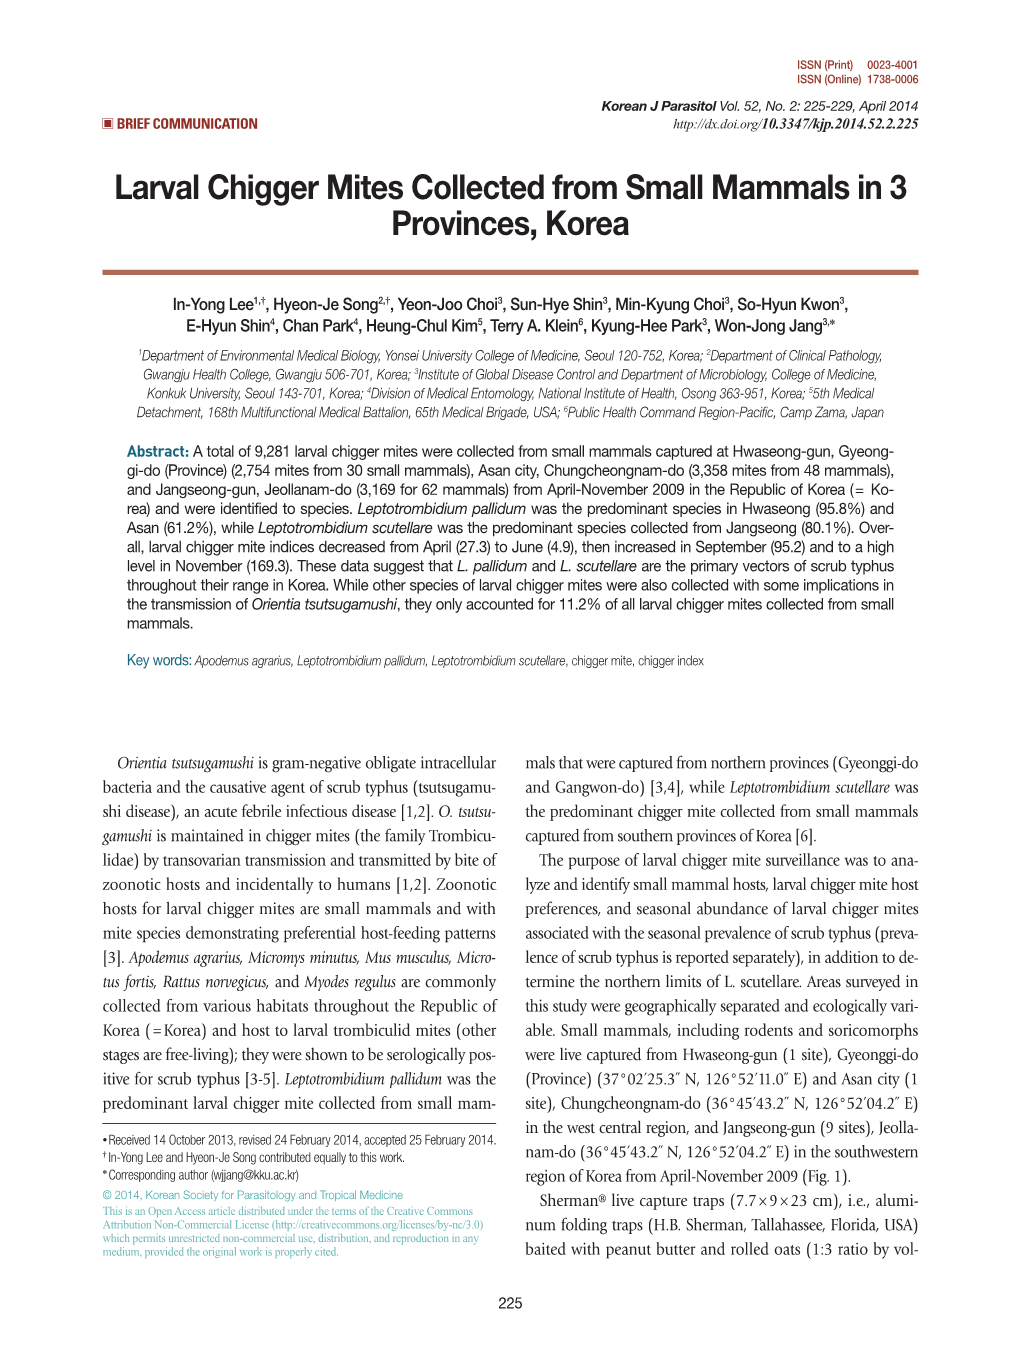 Larval Chigger Mites Collected from Small Mammals in 3 Provinces, Korea